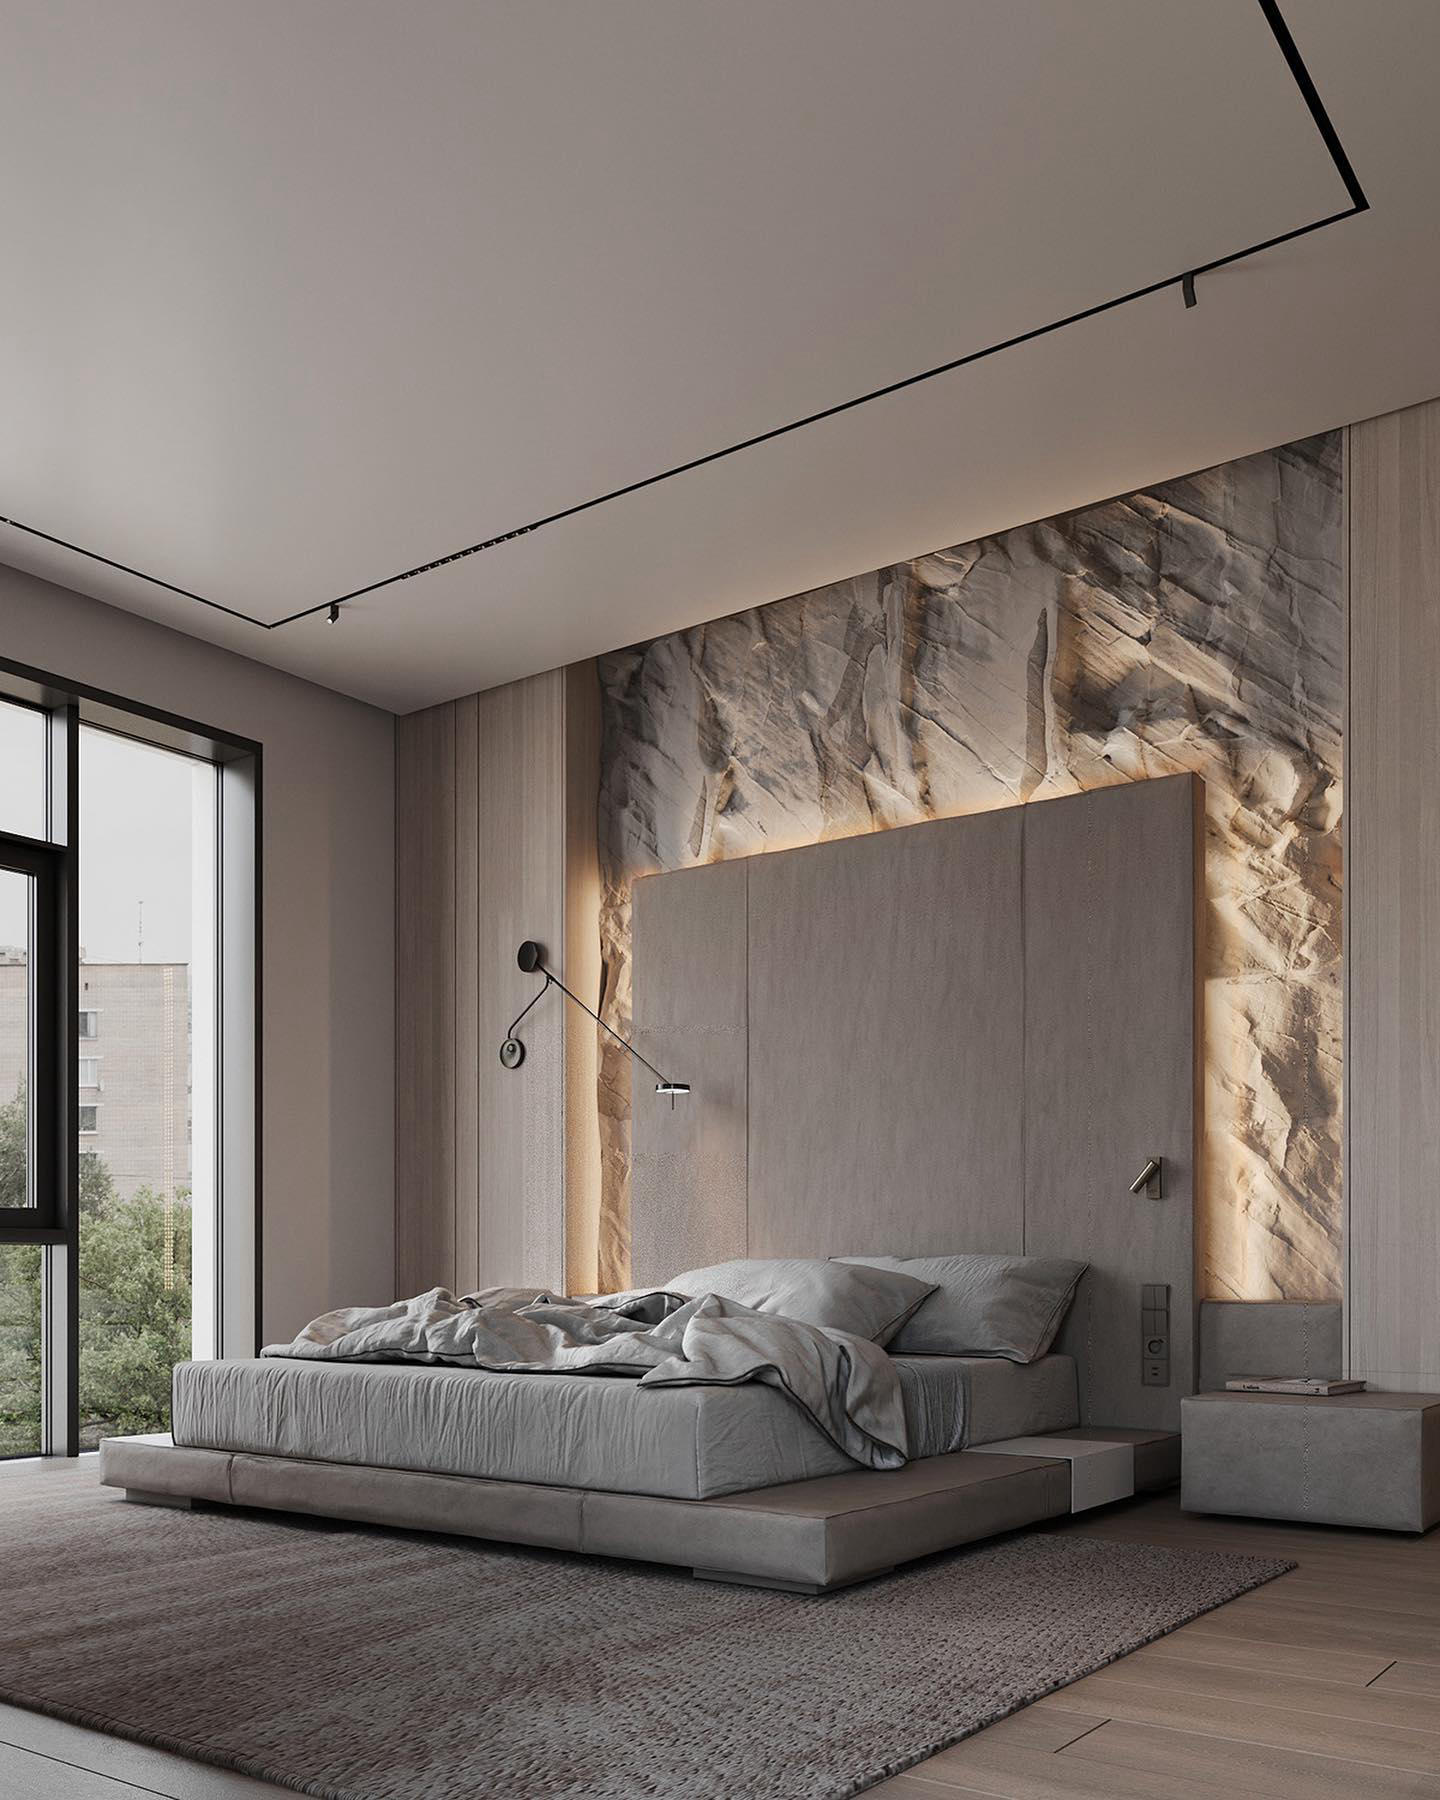 image  1 Design.Only - Comment below your thoughts about this stunning master bedroom